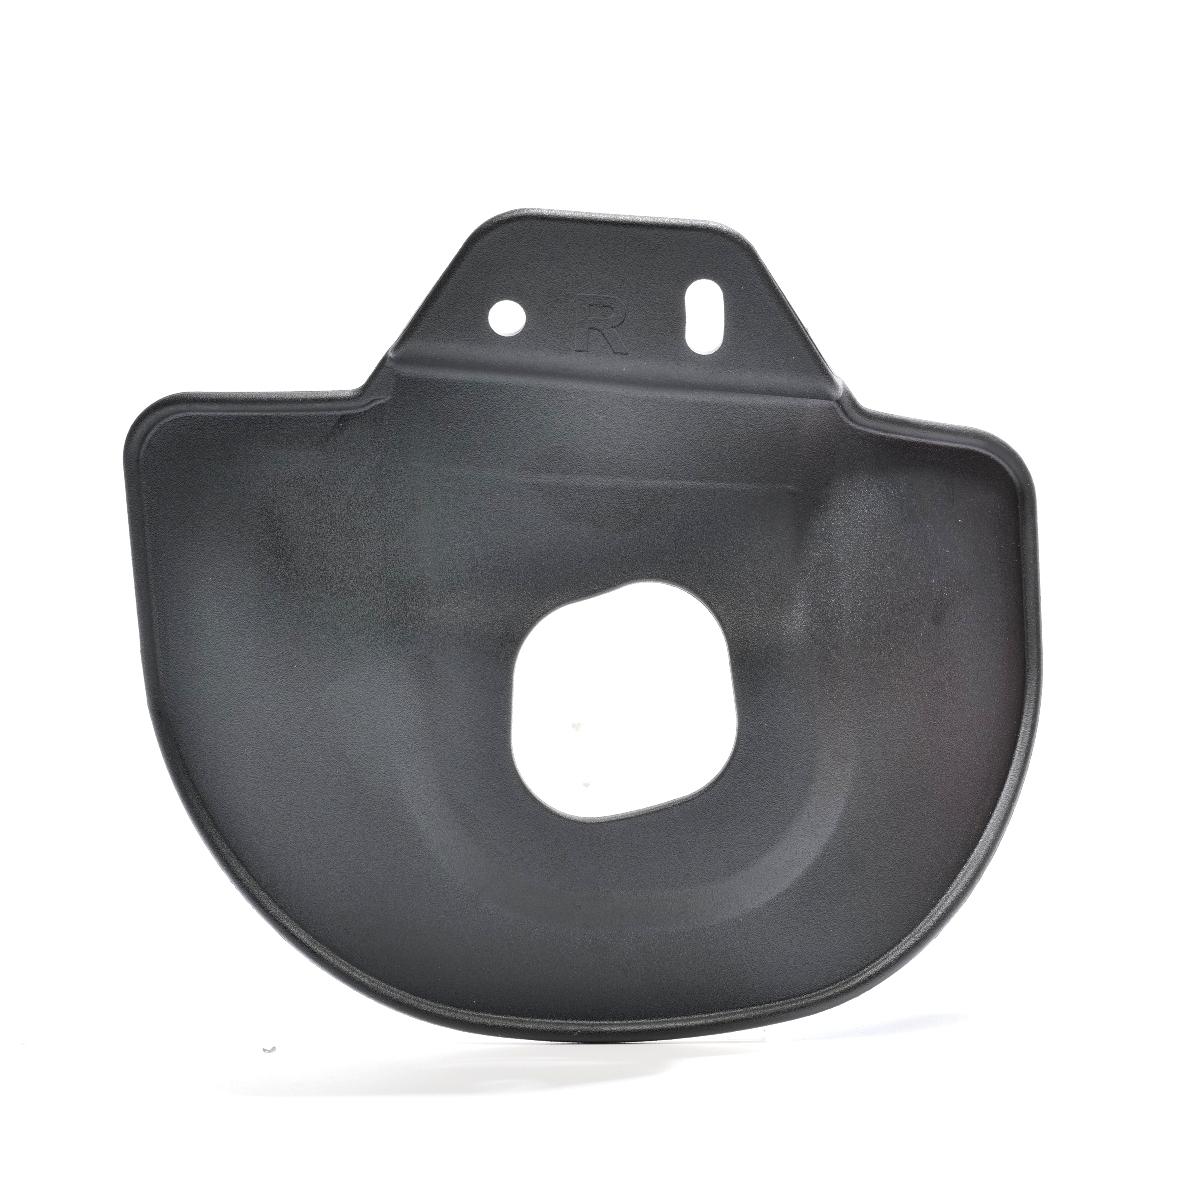 Safariland 568BL - INJECTION MOLDED CANTABLE PADDLE FOR SAFARILAND® 3-HOLE PATTERN HOLSTERS